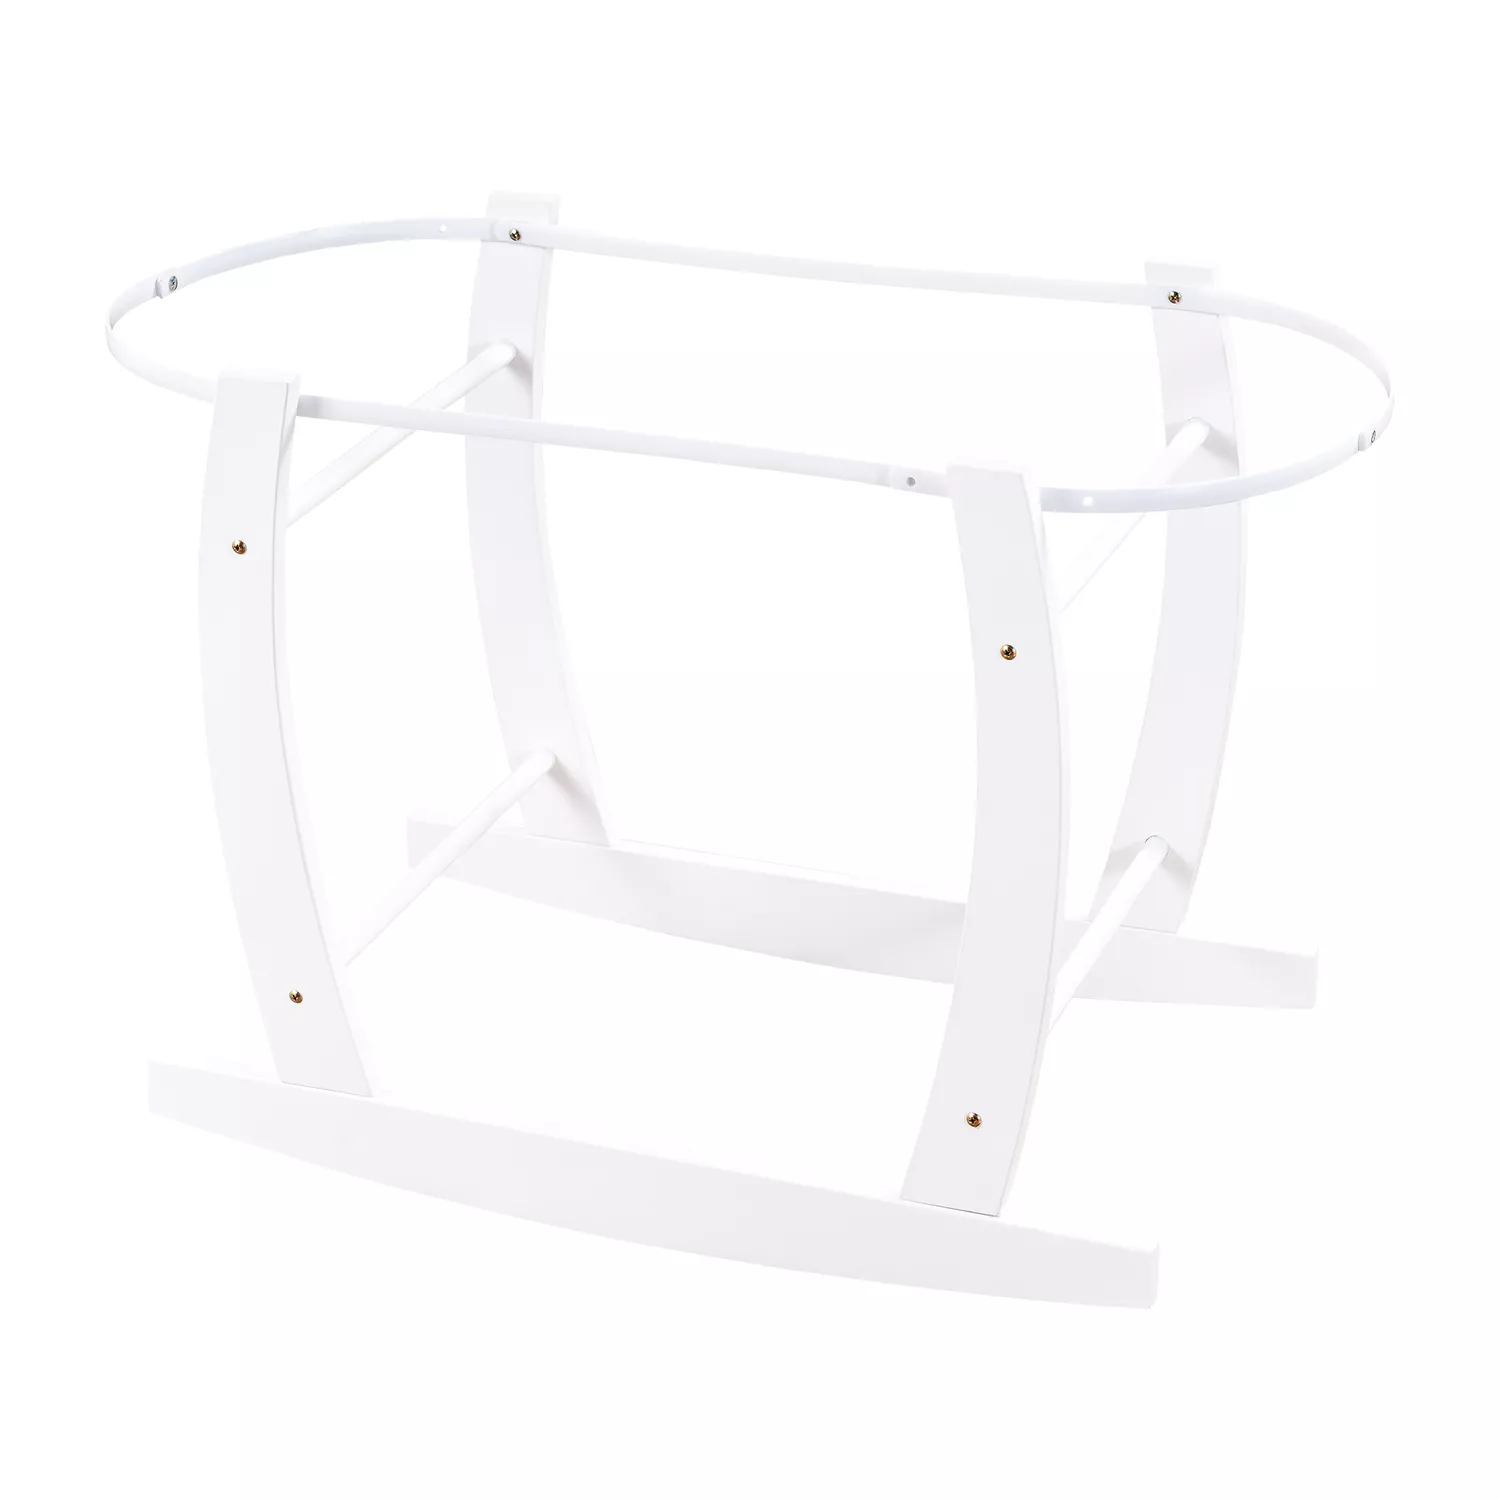 Picci Moses Basket Stand